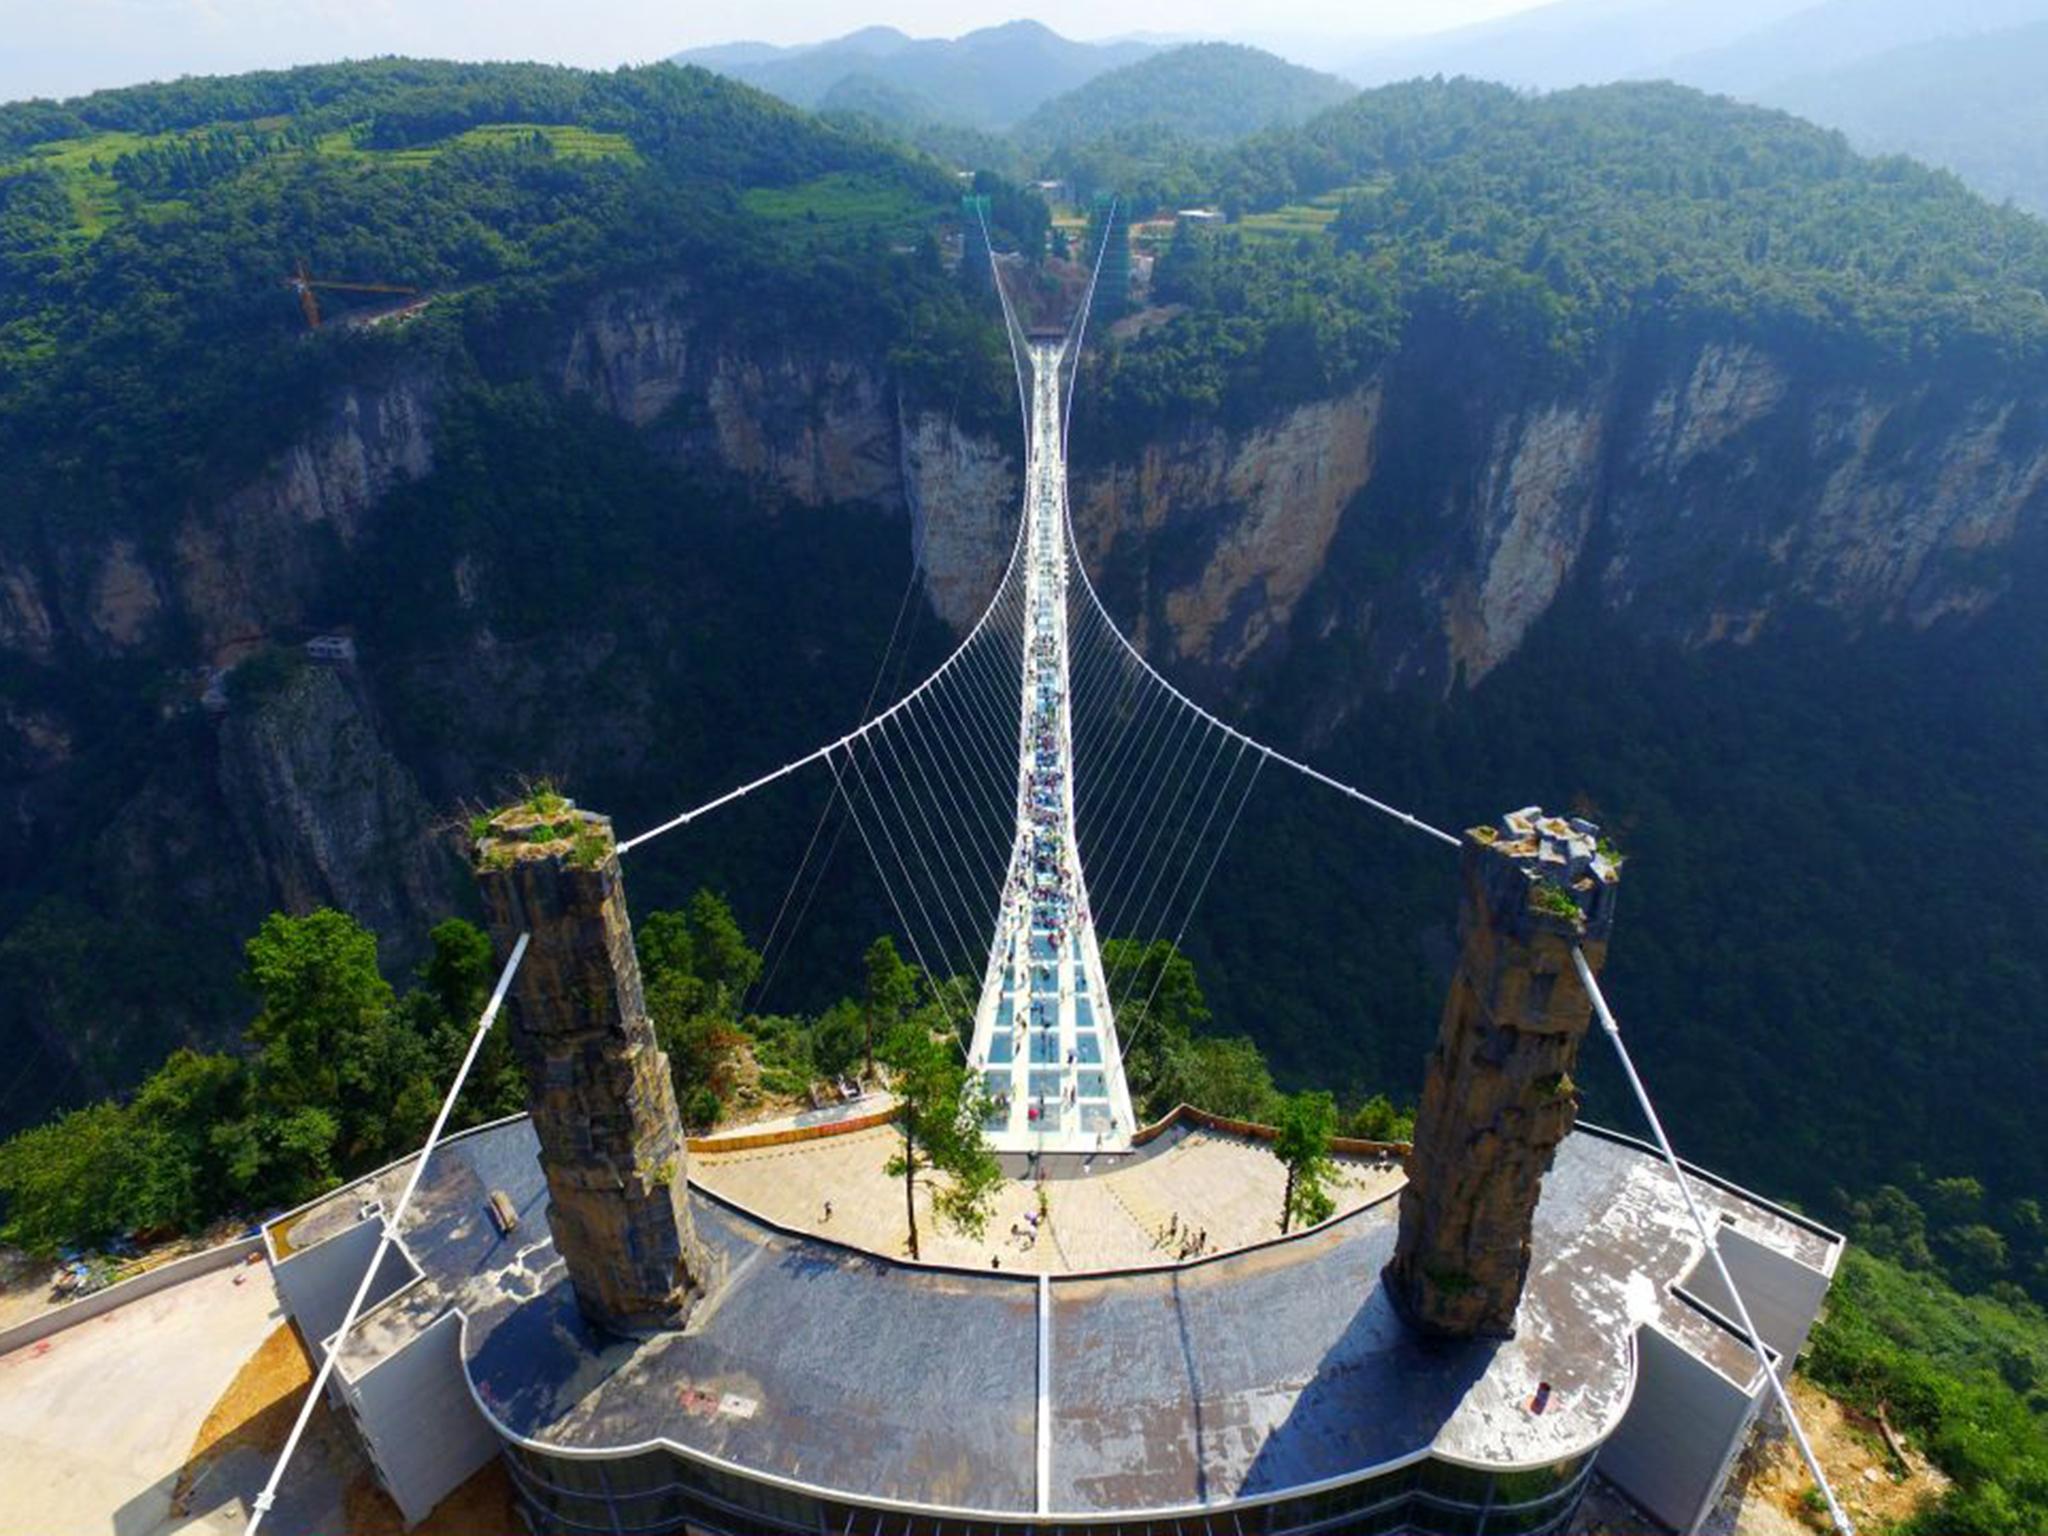 The glass-bottomed bridge in Zhangjiajie, China, is the longest and highest in the world